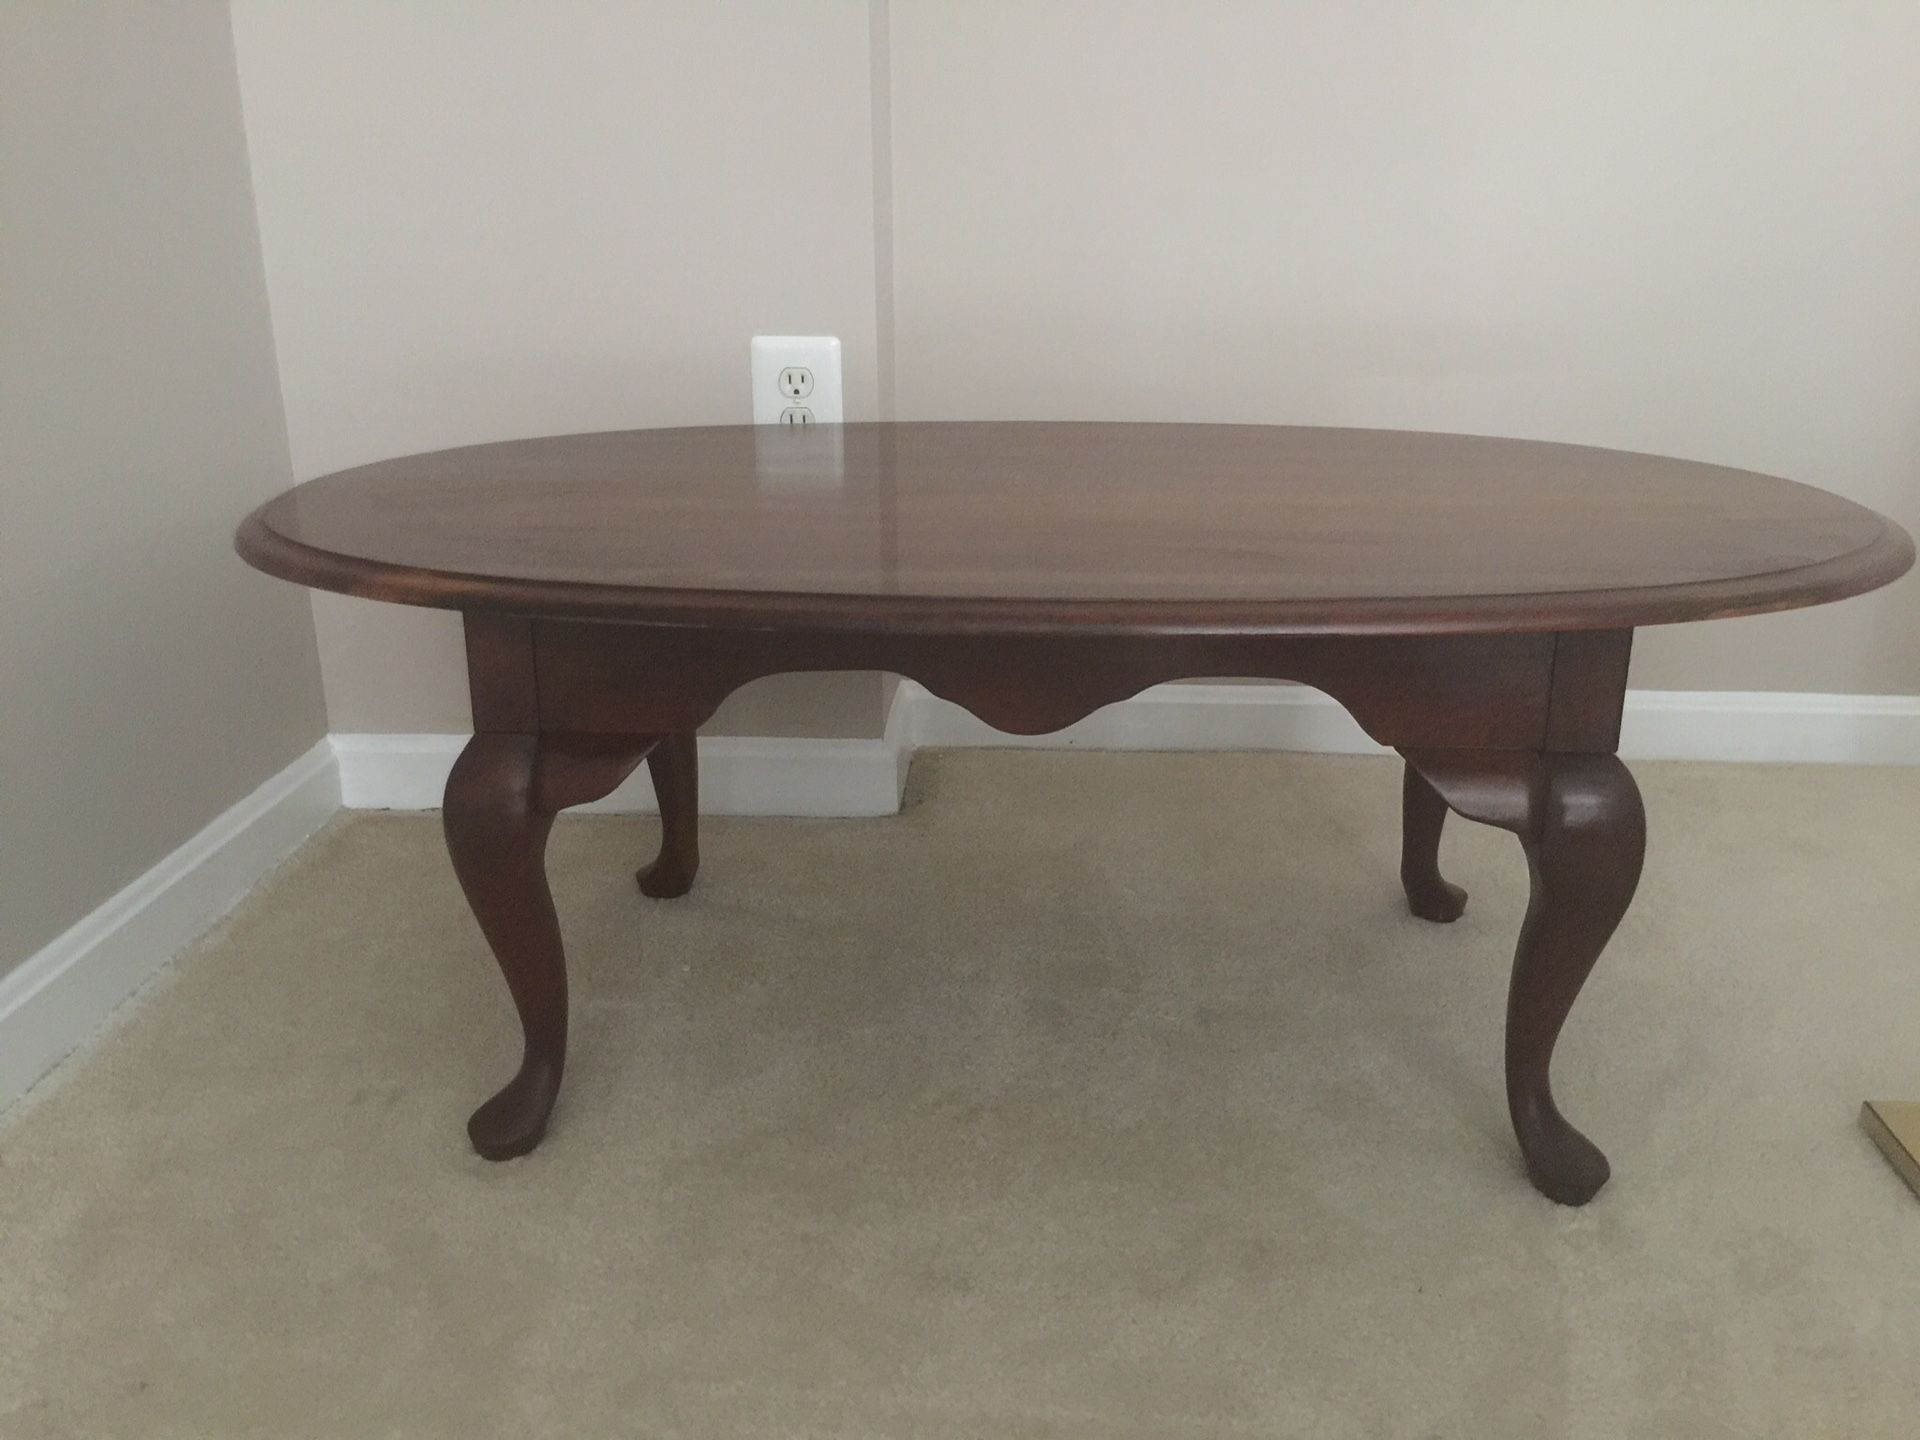 Reduced price/ Coffee table and end tables